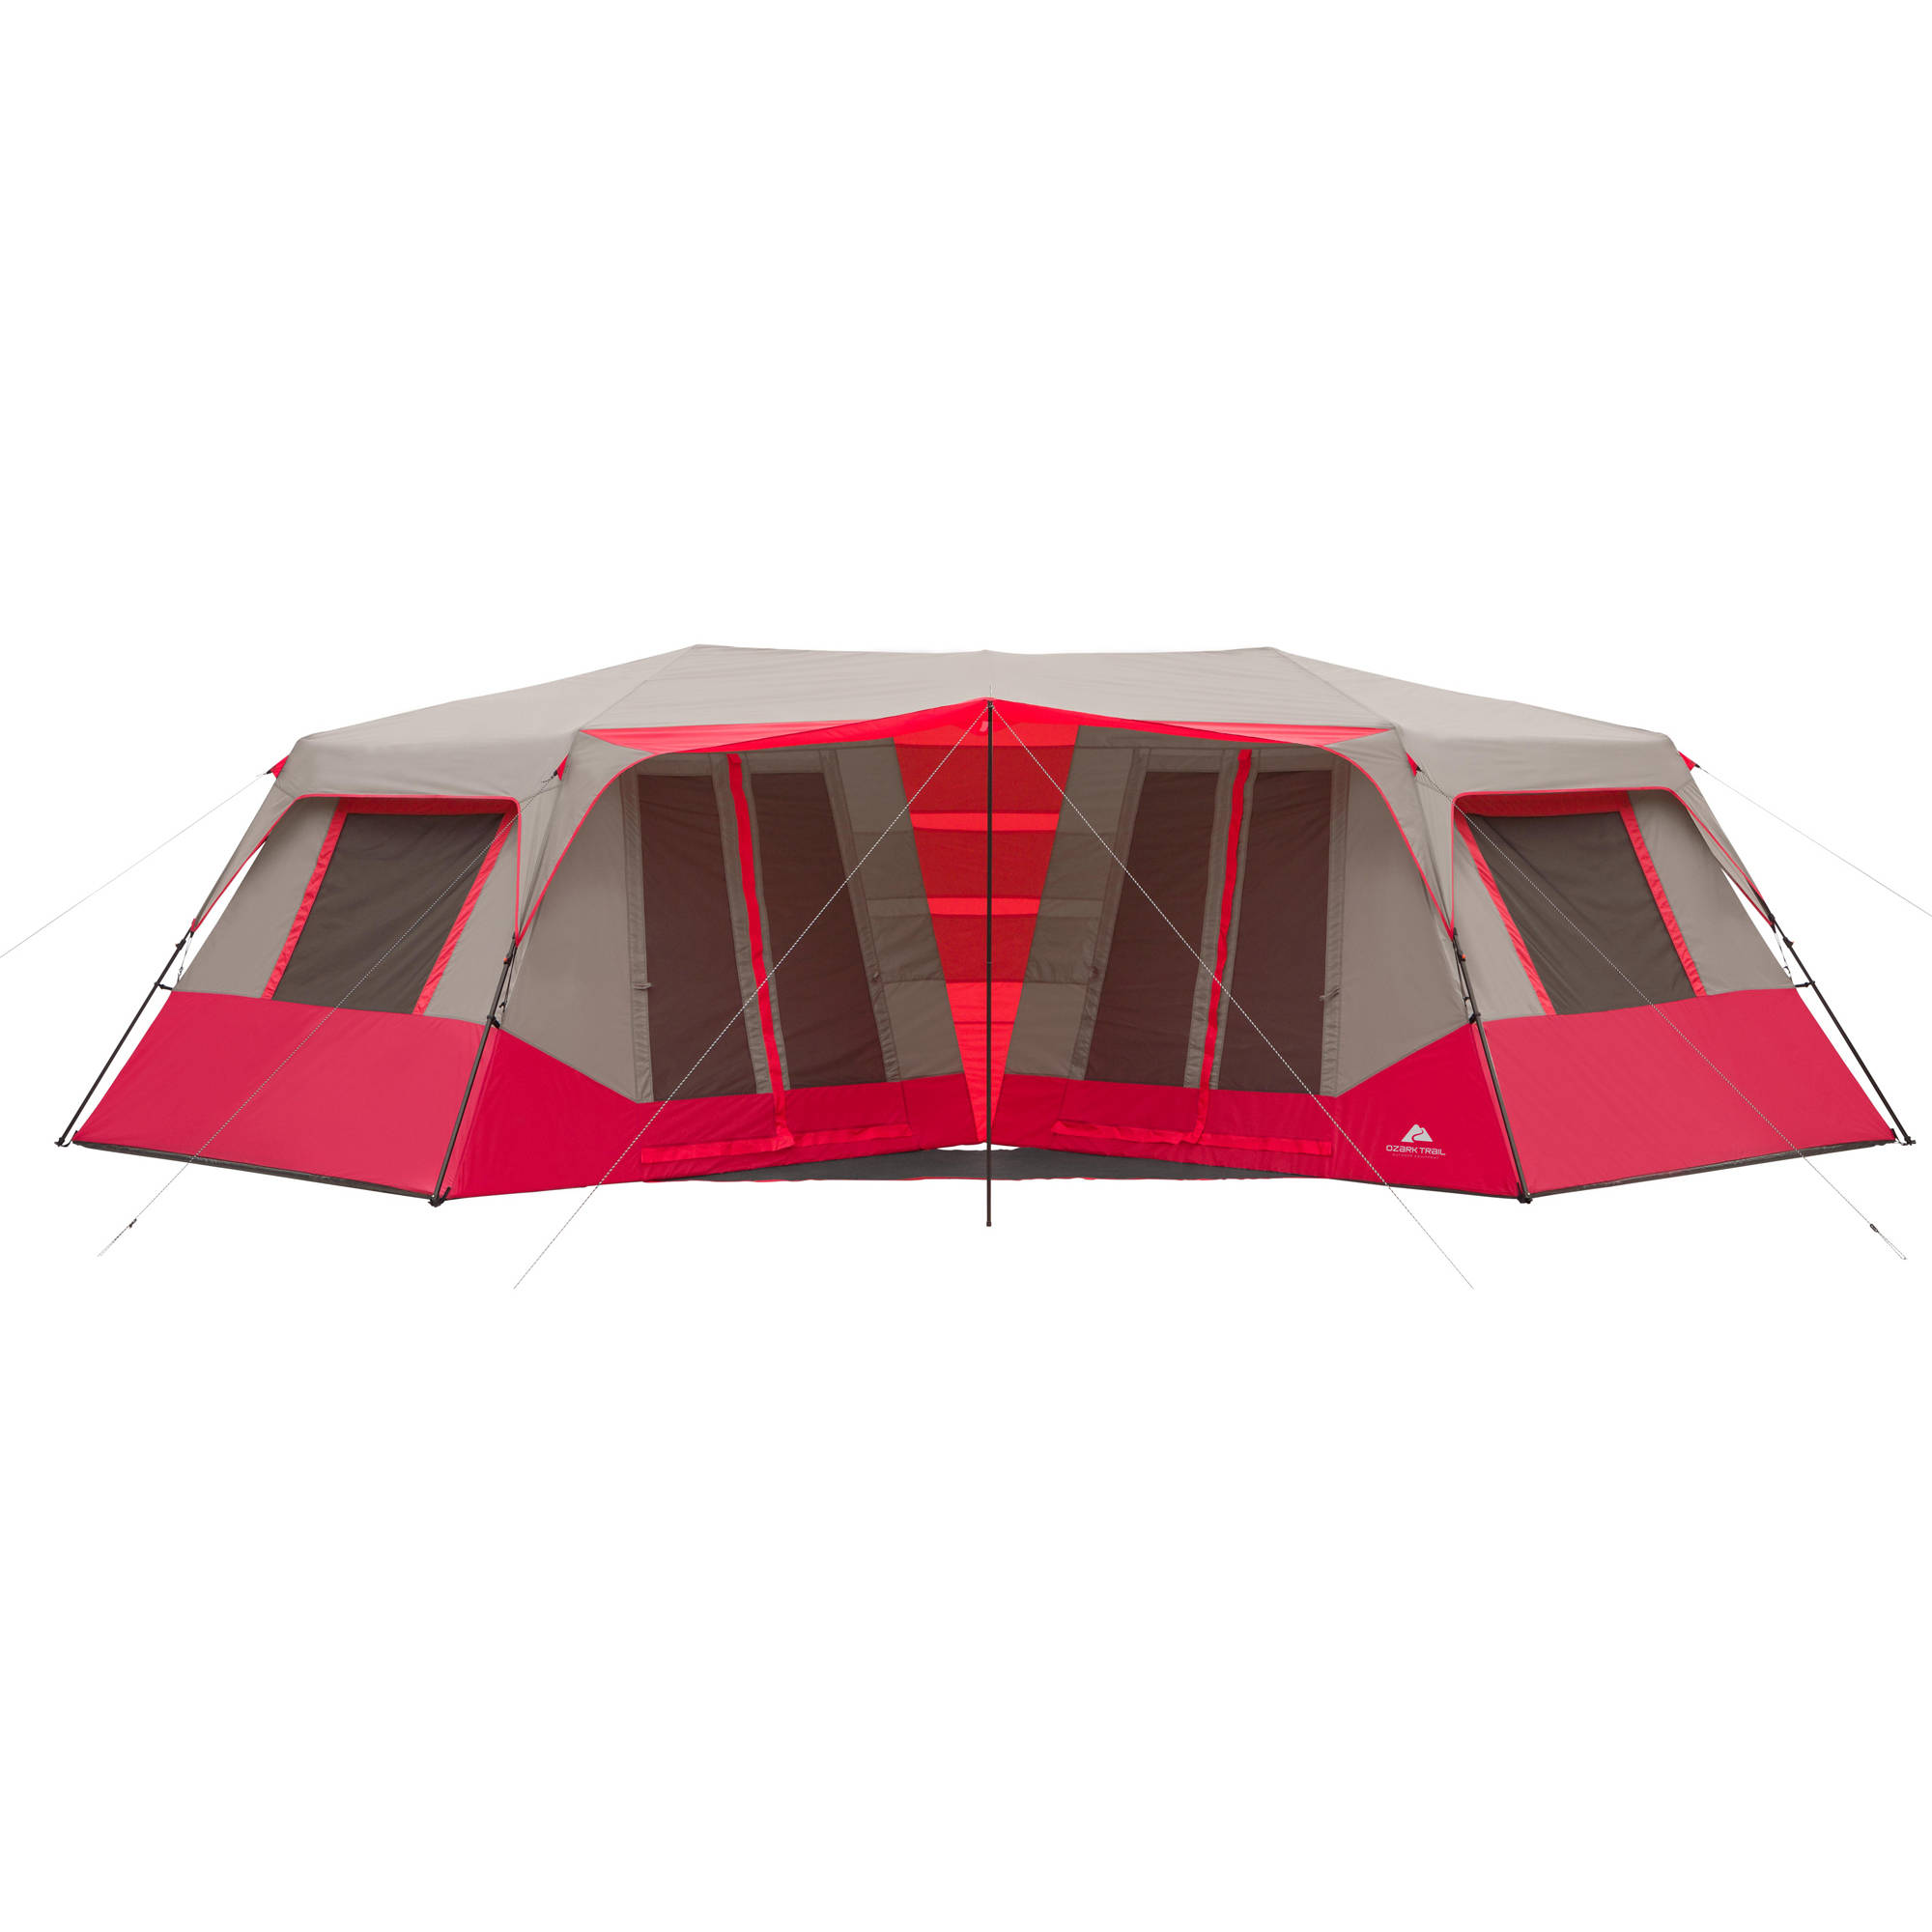 12 great tent deals at Walmart right now!